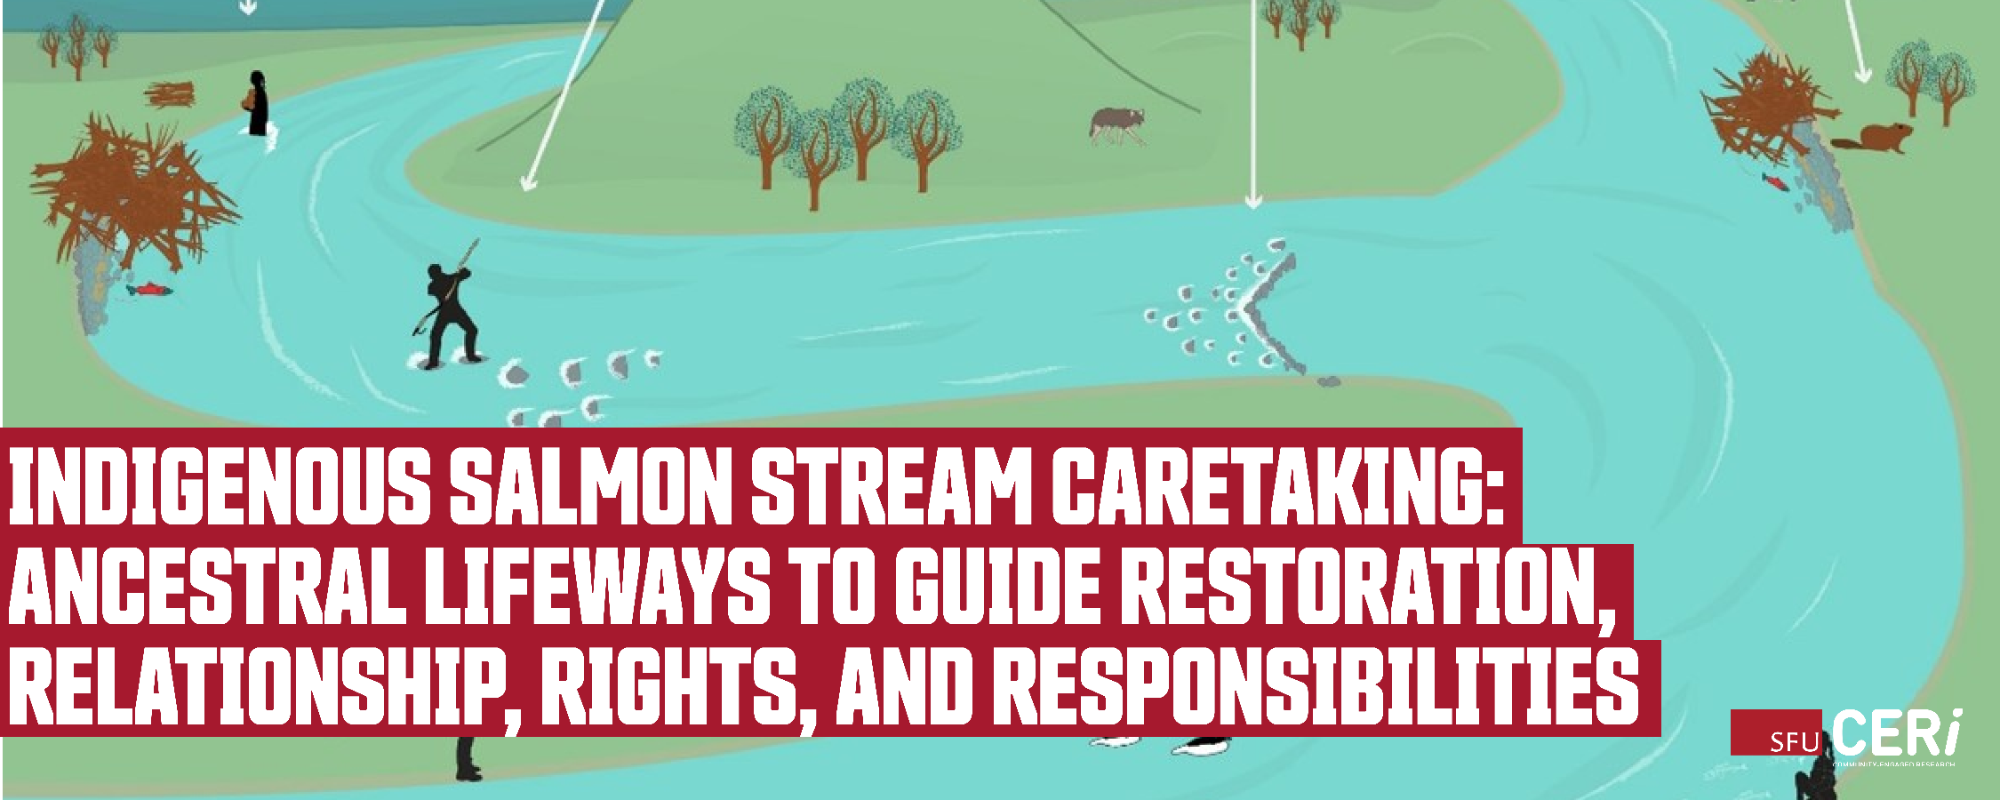 Indigenous salmon stream caretaking: Ancestral lifeways to guide restoration, relationship, rights, and responsibilities